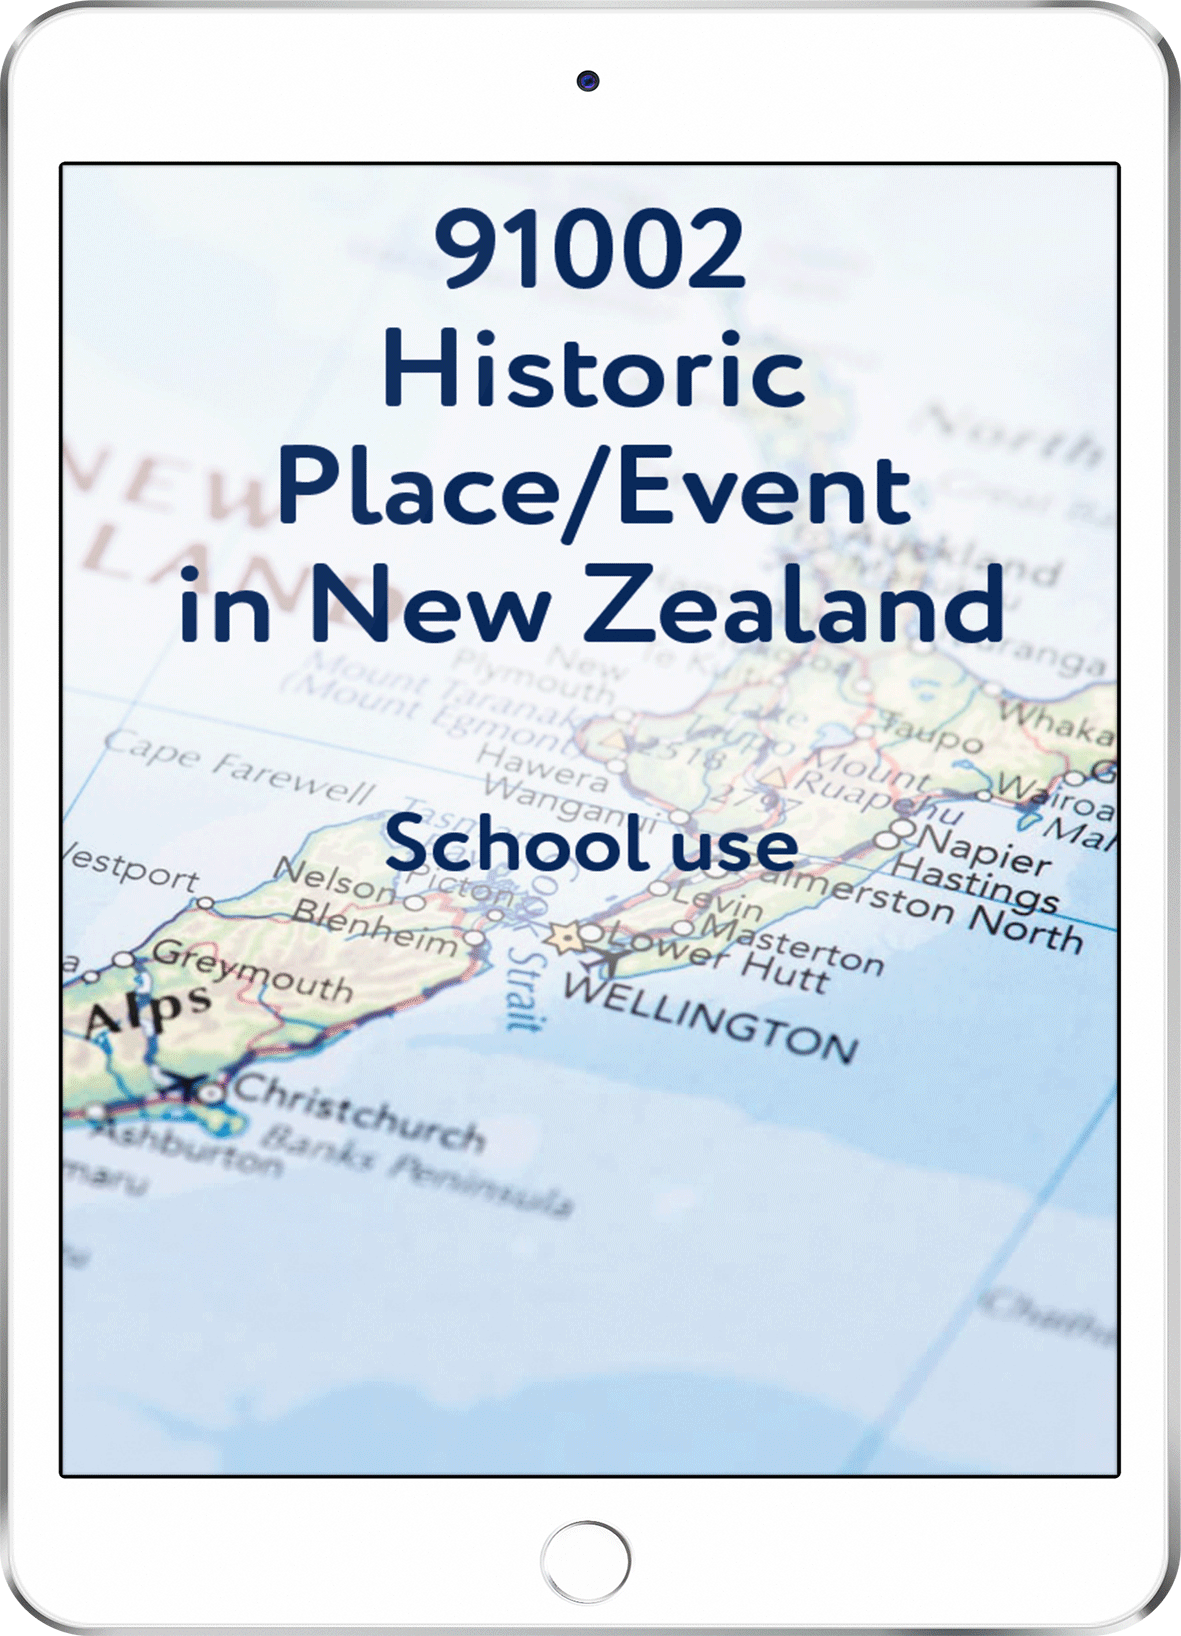 91002 Historic Place/Event in NZ - School Use